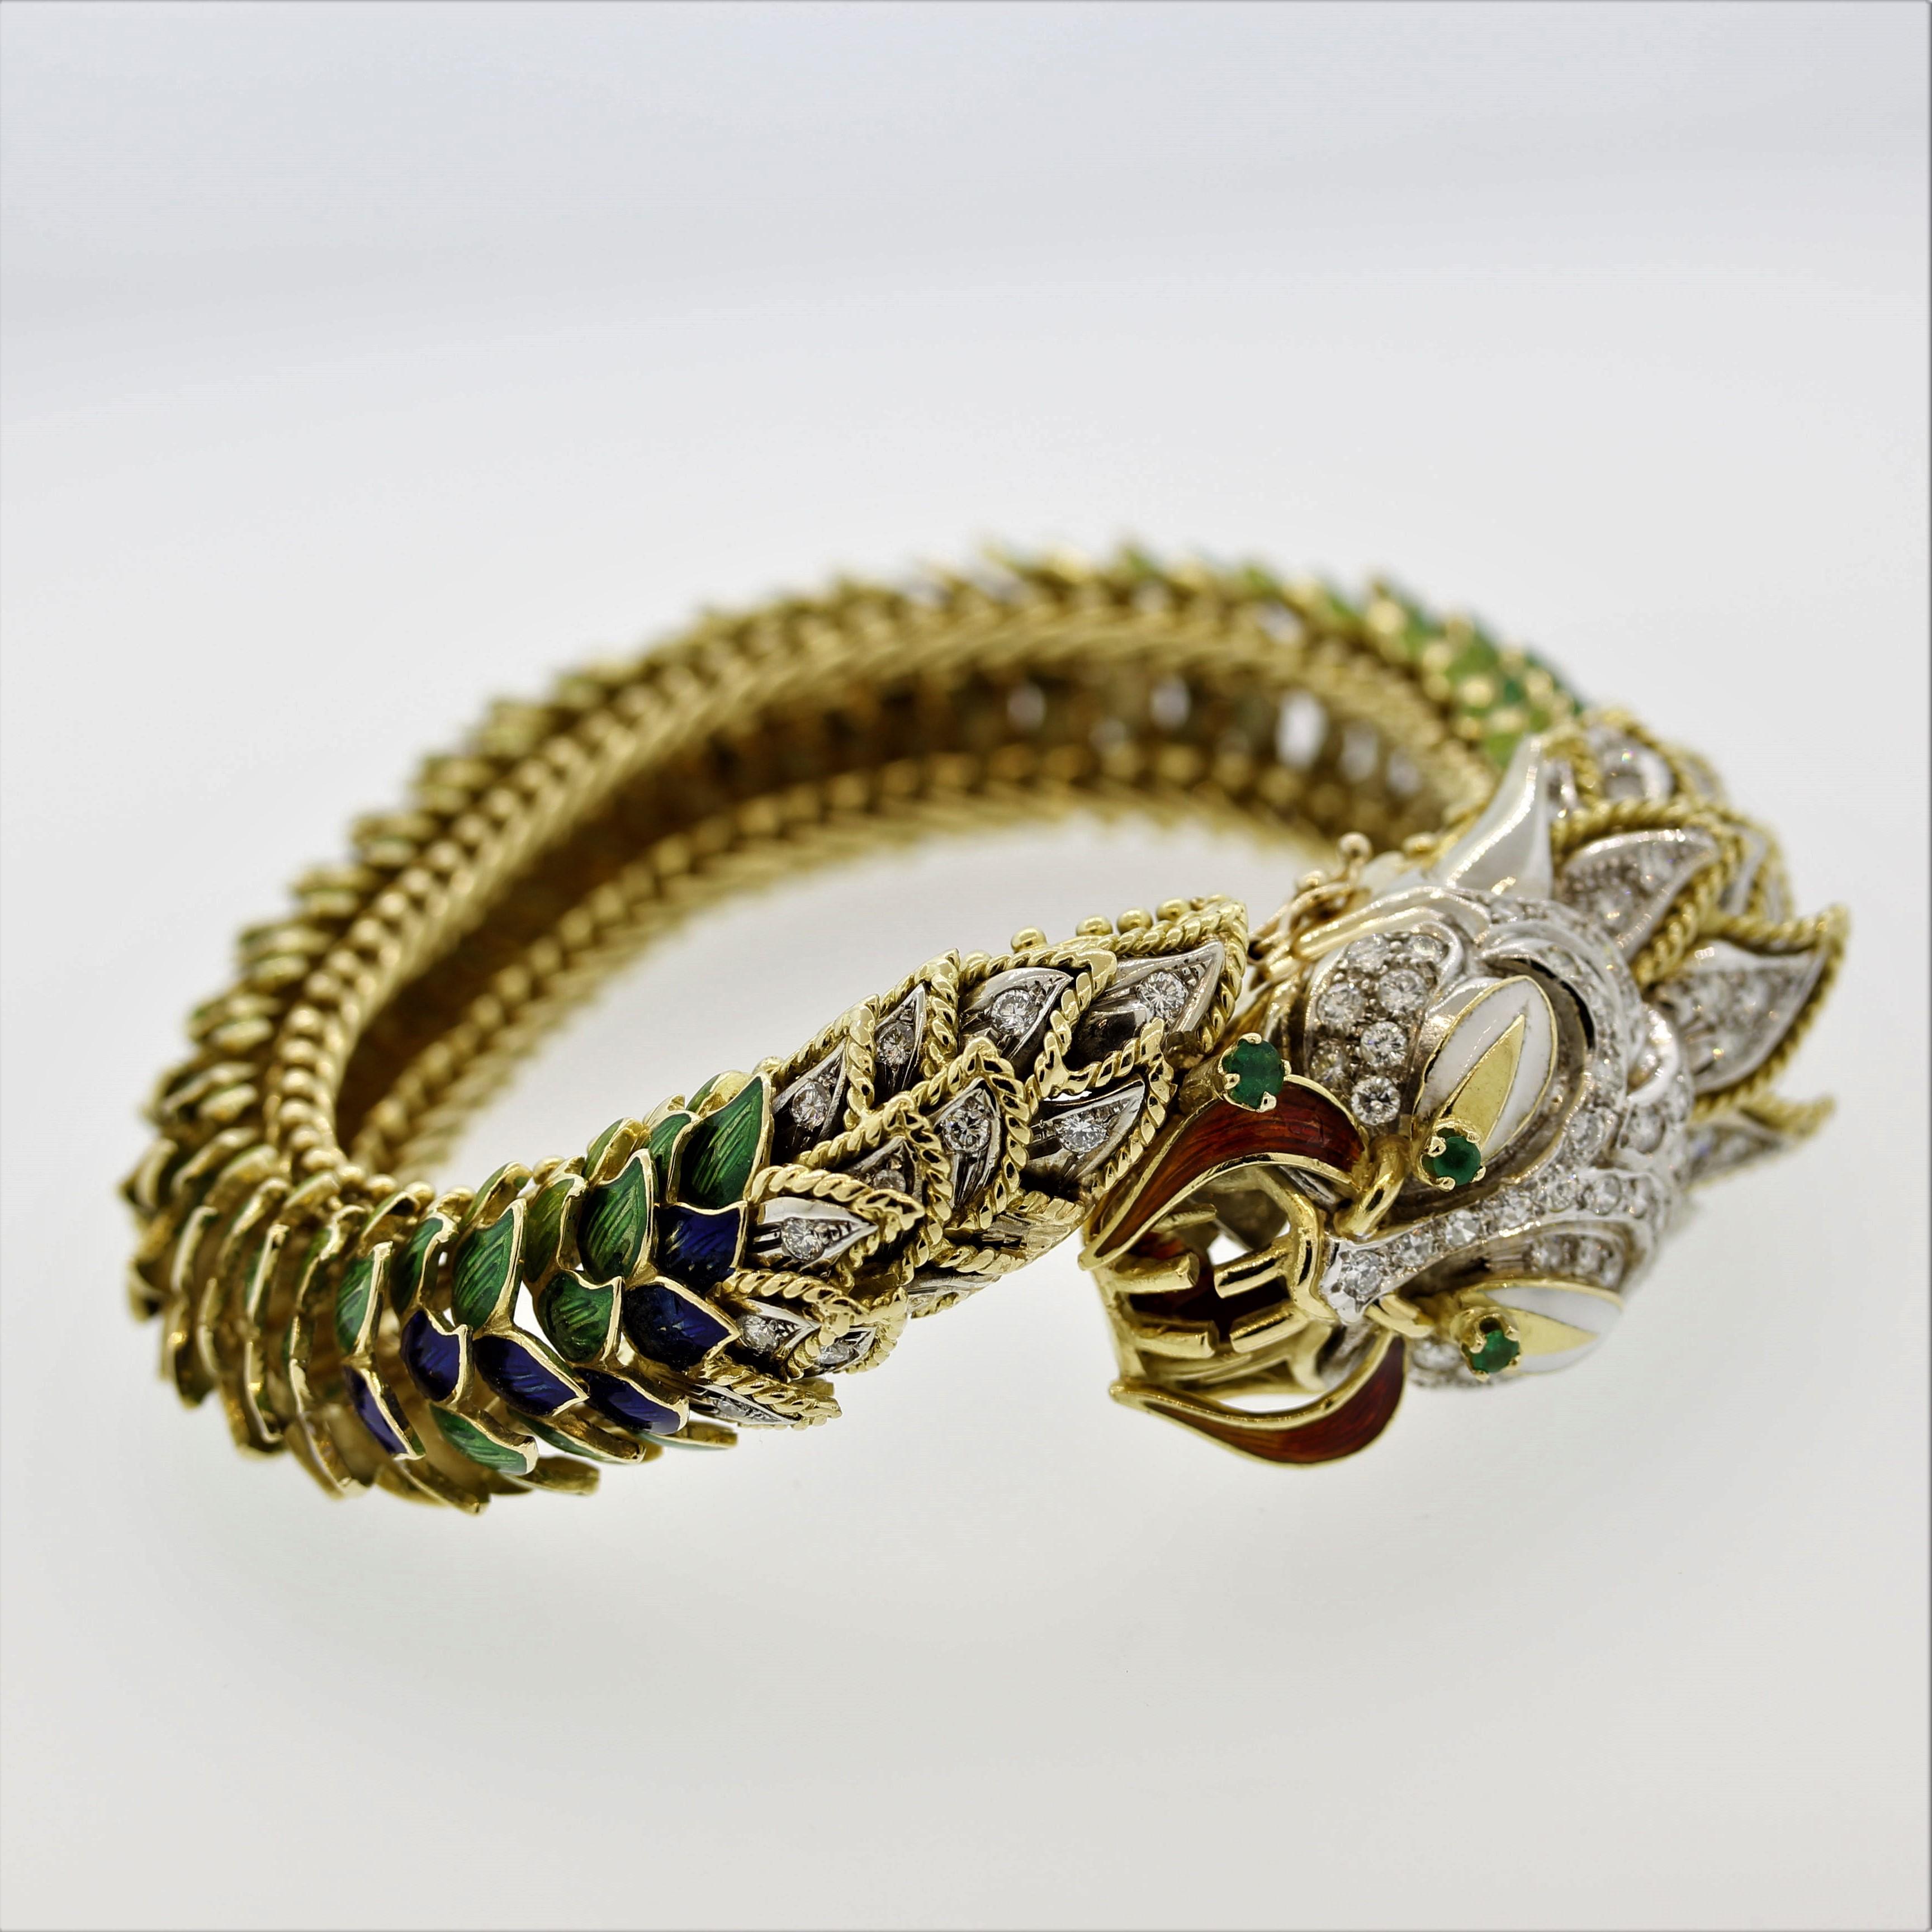 An extraordinary and exceptionally detailed dragon bracelet. The bracelet was made by the finest goldworks in Italy. The dragons 18k gold armature was expertly designed allowing each set of scales to flex and bend on its own. For a large and